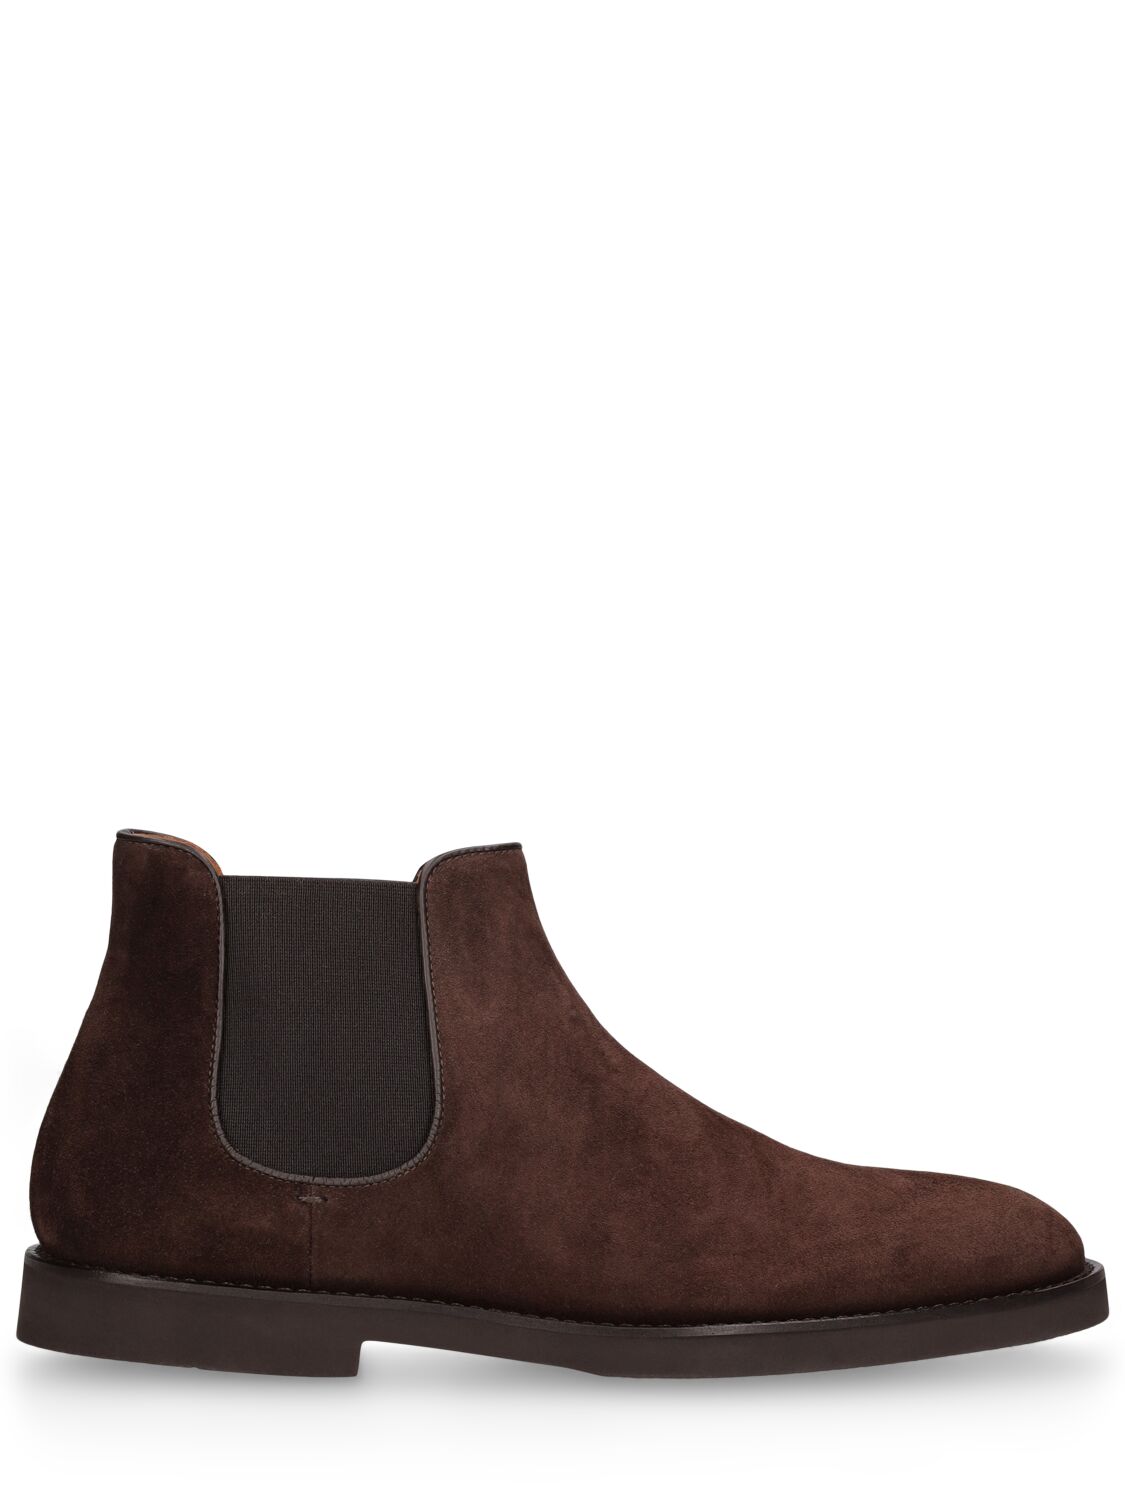 Doucal's Washed Leather Suede Beetle Boots In Dark Brown